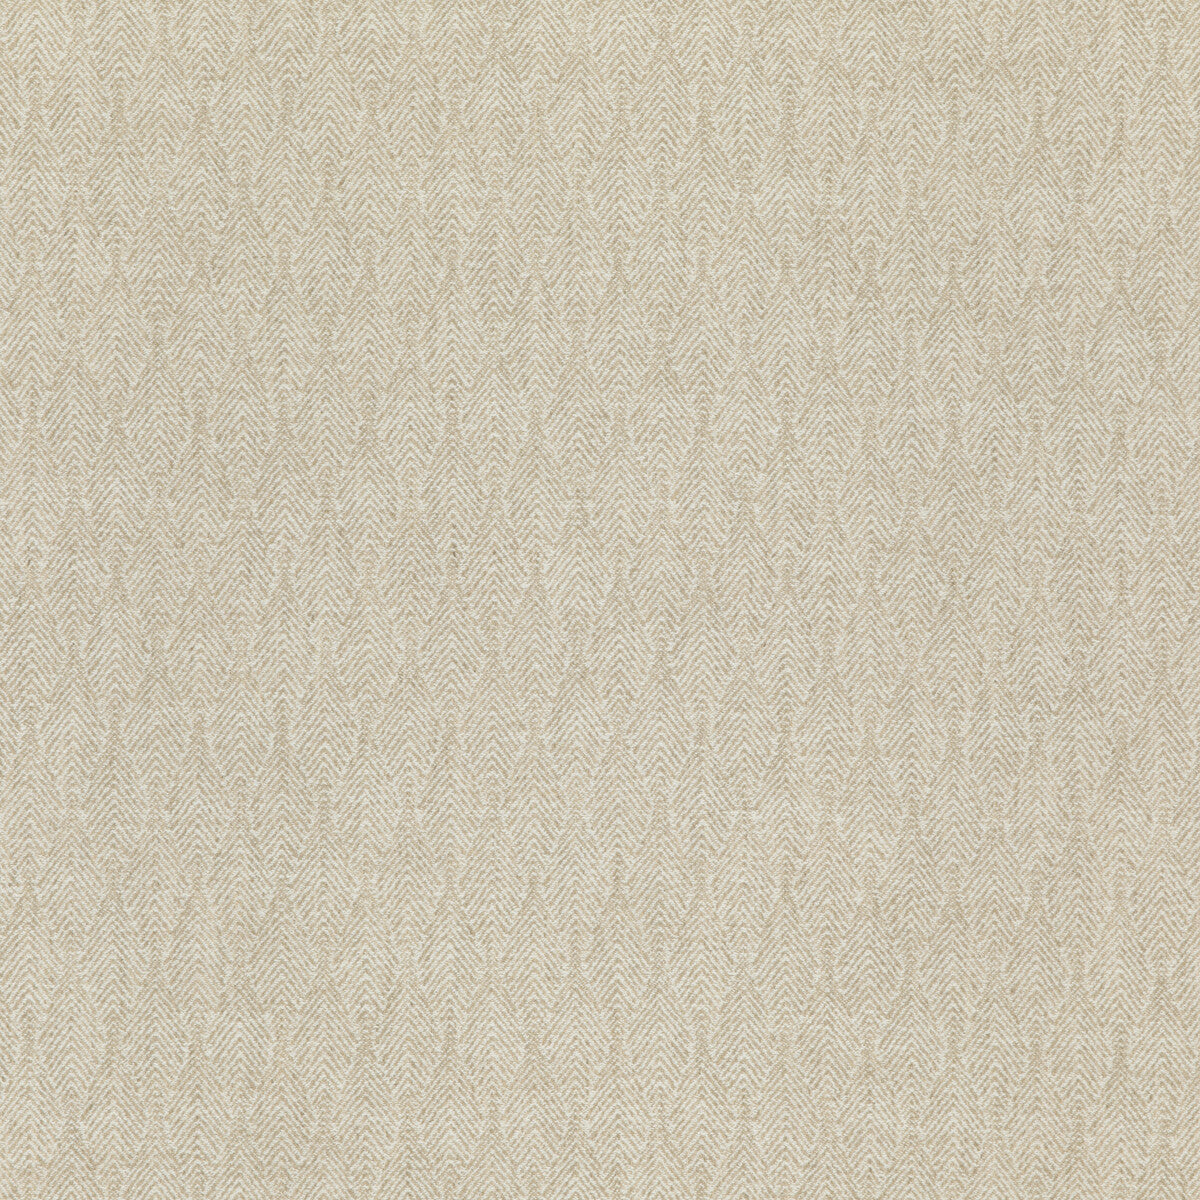 Capo fabric in parchment color - pattern ED85298.225.0 - by Threads in the Luxury Weaves collection